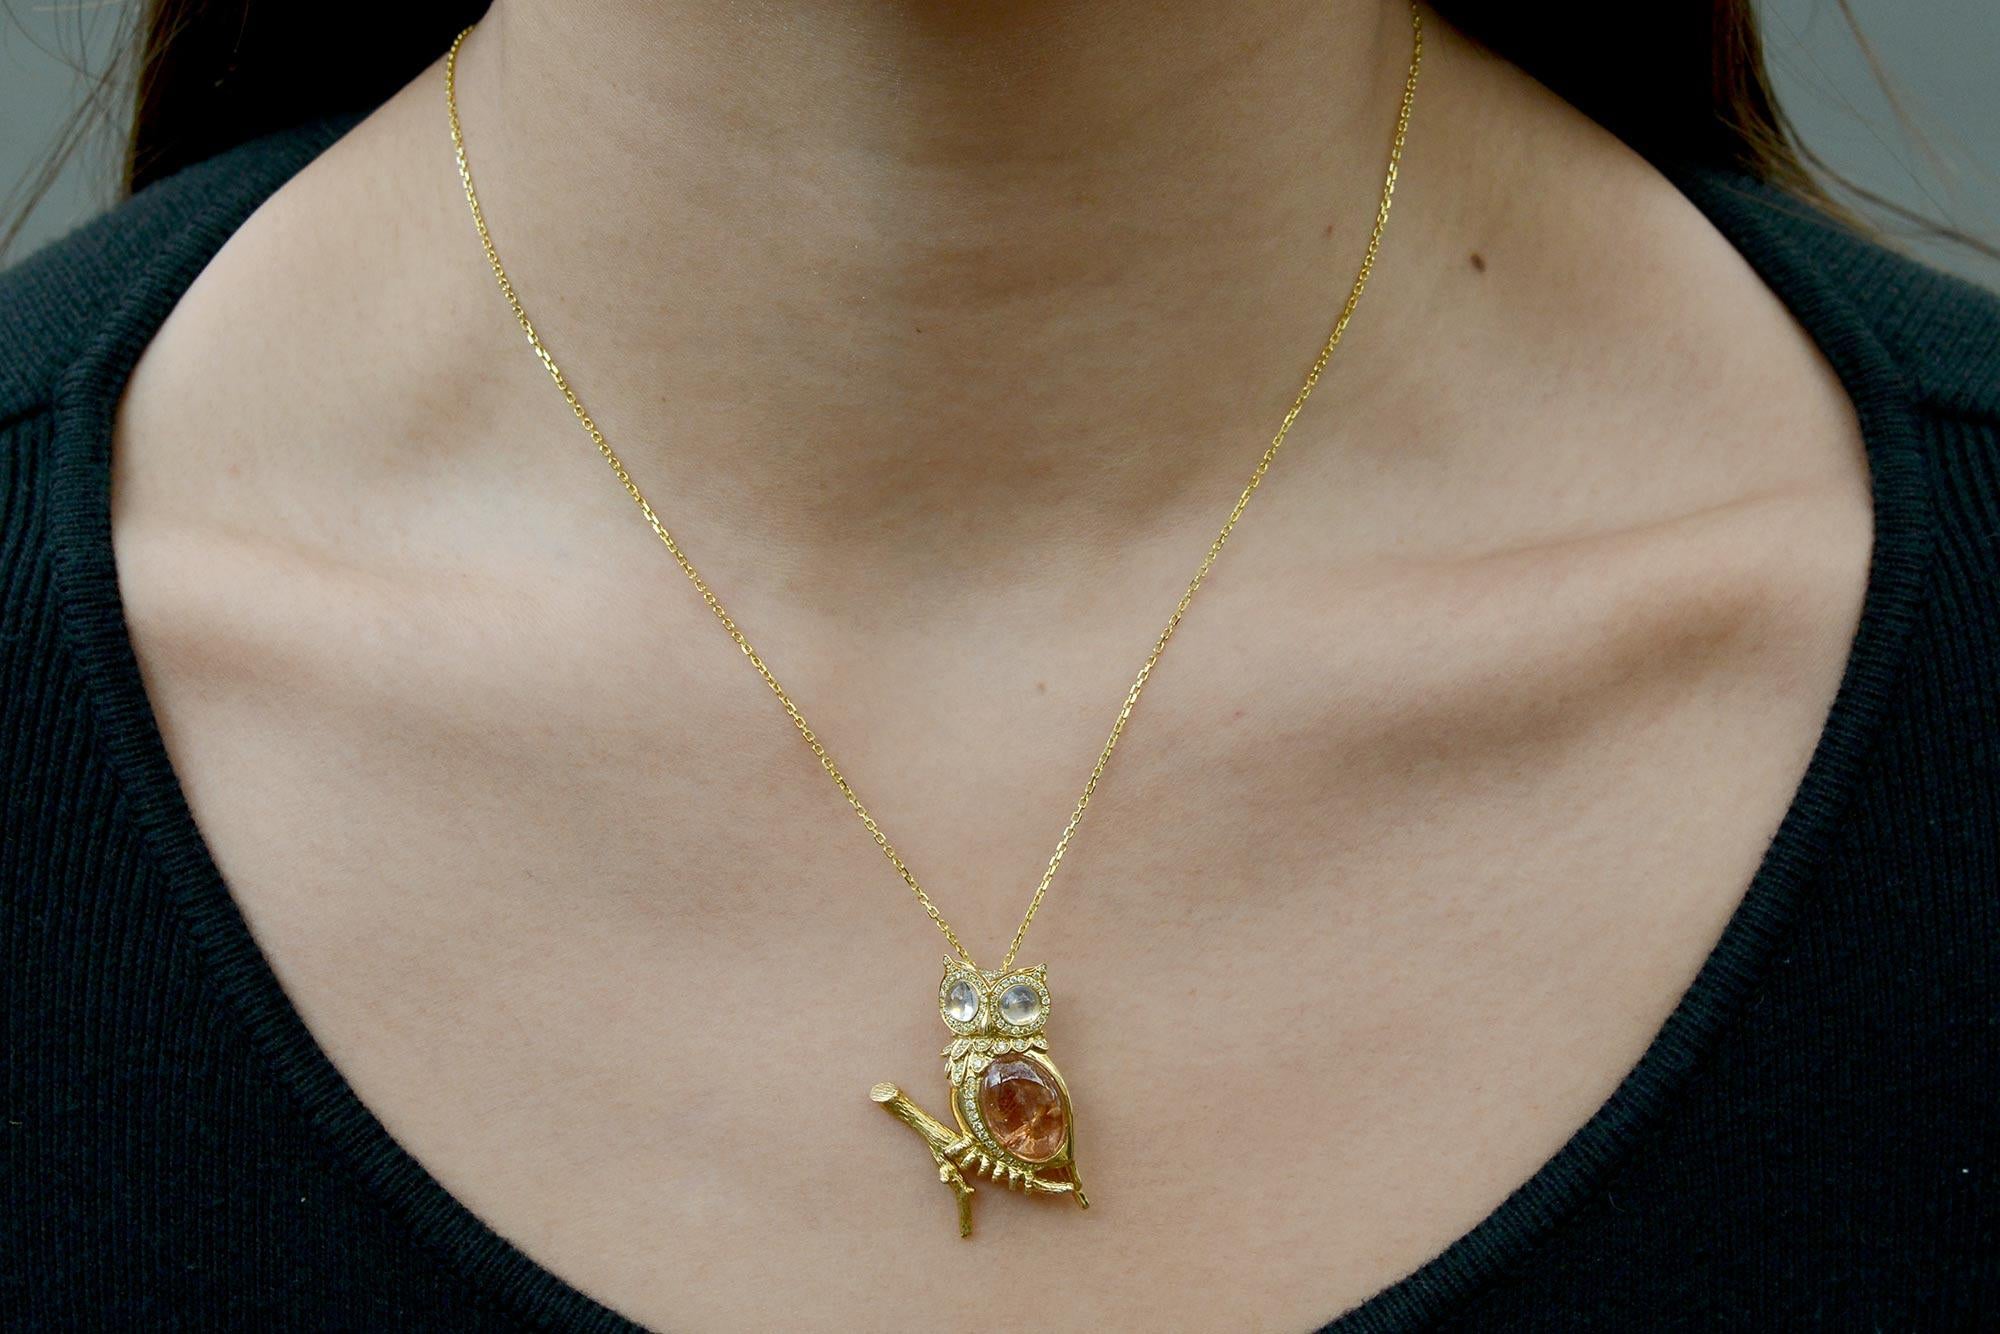 This vintage owl necklace is a hoot! Presenting an 18k yellow gold owl with glowing moonstone eyes and an illuminating peachy orange tourmaline breast with intriguing characteristics. This lavish bird is further embellished with 65 diamond